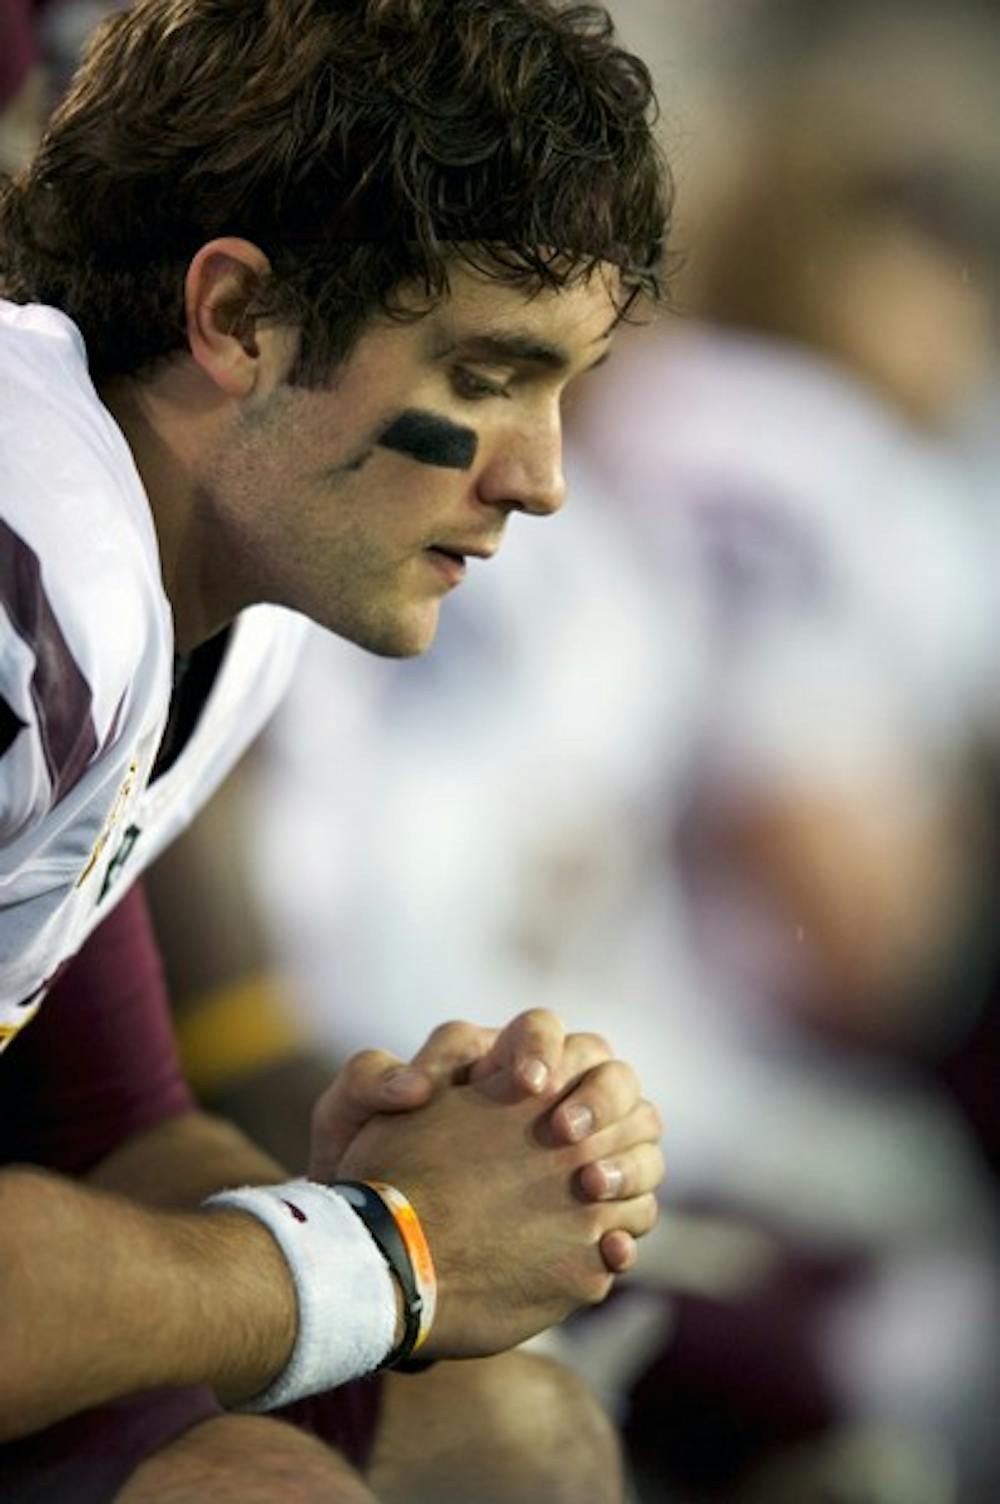 DOWN BUT NOT OUT: Junior quarterback Brock Osweiler contemplates on the bench during Oregon’s 41-27 win over the Sun Devils on Saturday. ASU is on its first bye week of the season, and plays against Colorado on Oct. 29 for the Homecoming game. (Photo by Michael Arellano)